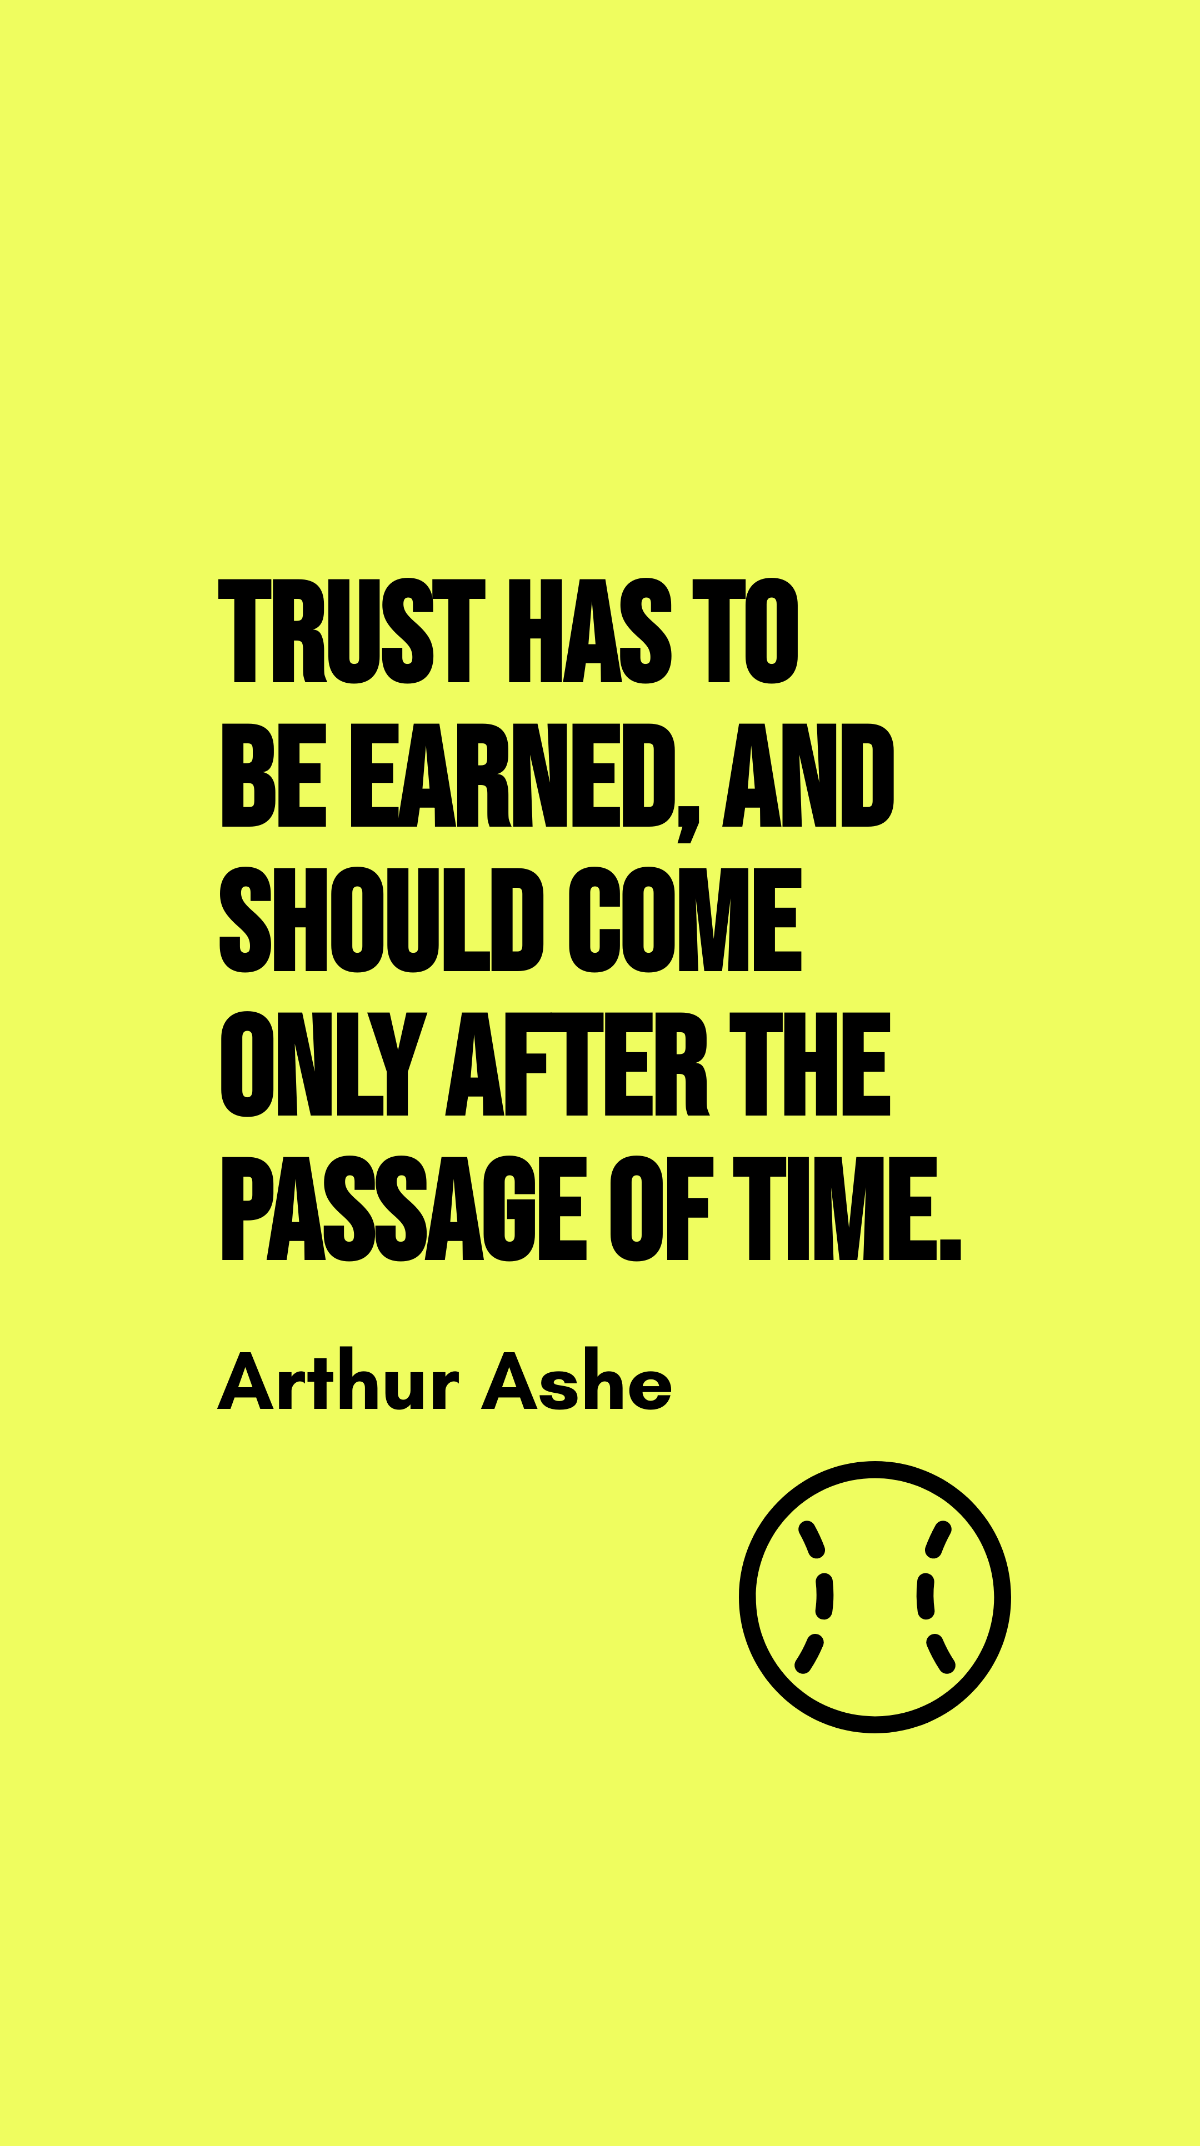 Arthur Ashe - Trust has to be earned, and should come only after the passage of time. Template